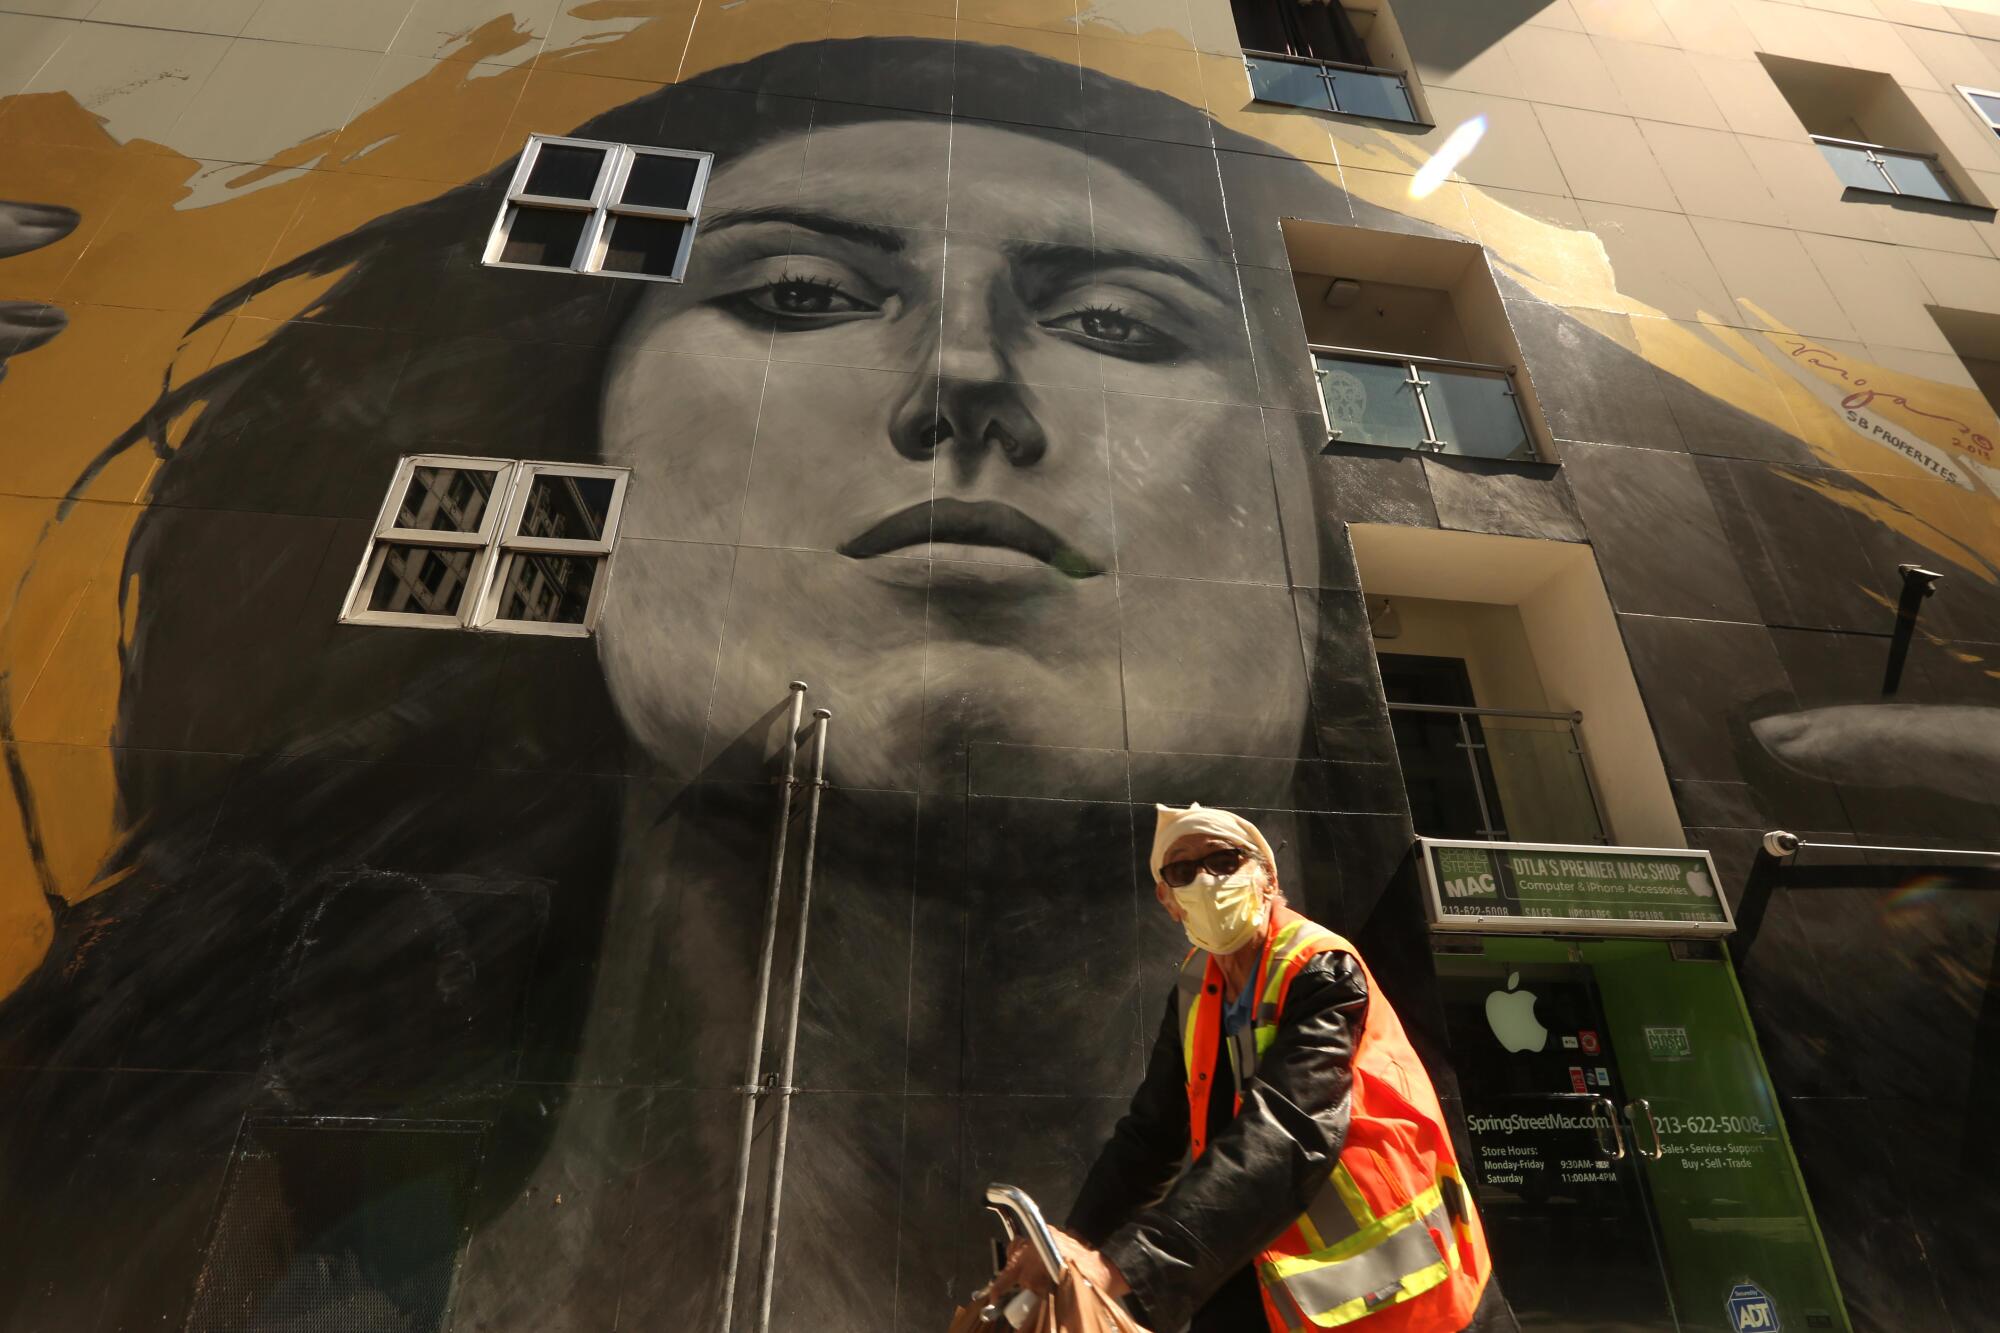 A bicyclist rides past a mural by street artist Robert Vargas in downtown Los Angeles.